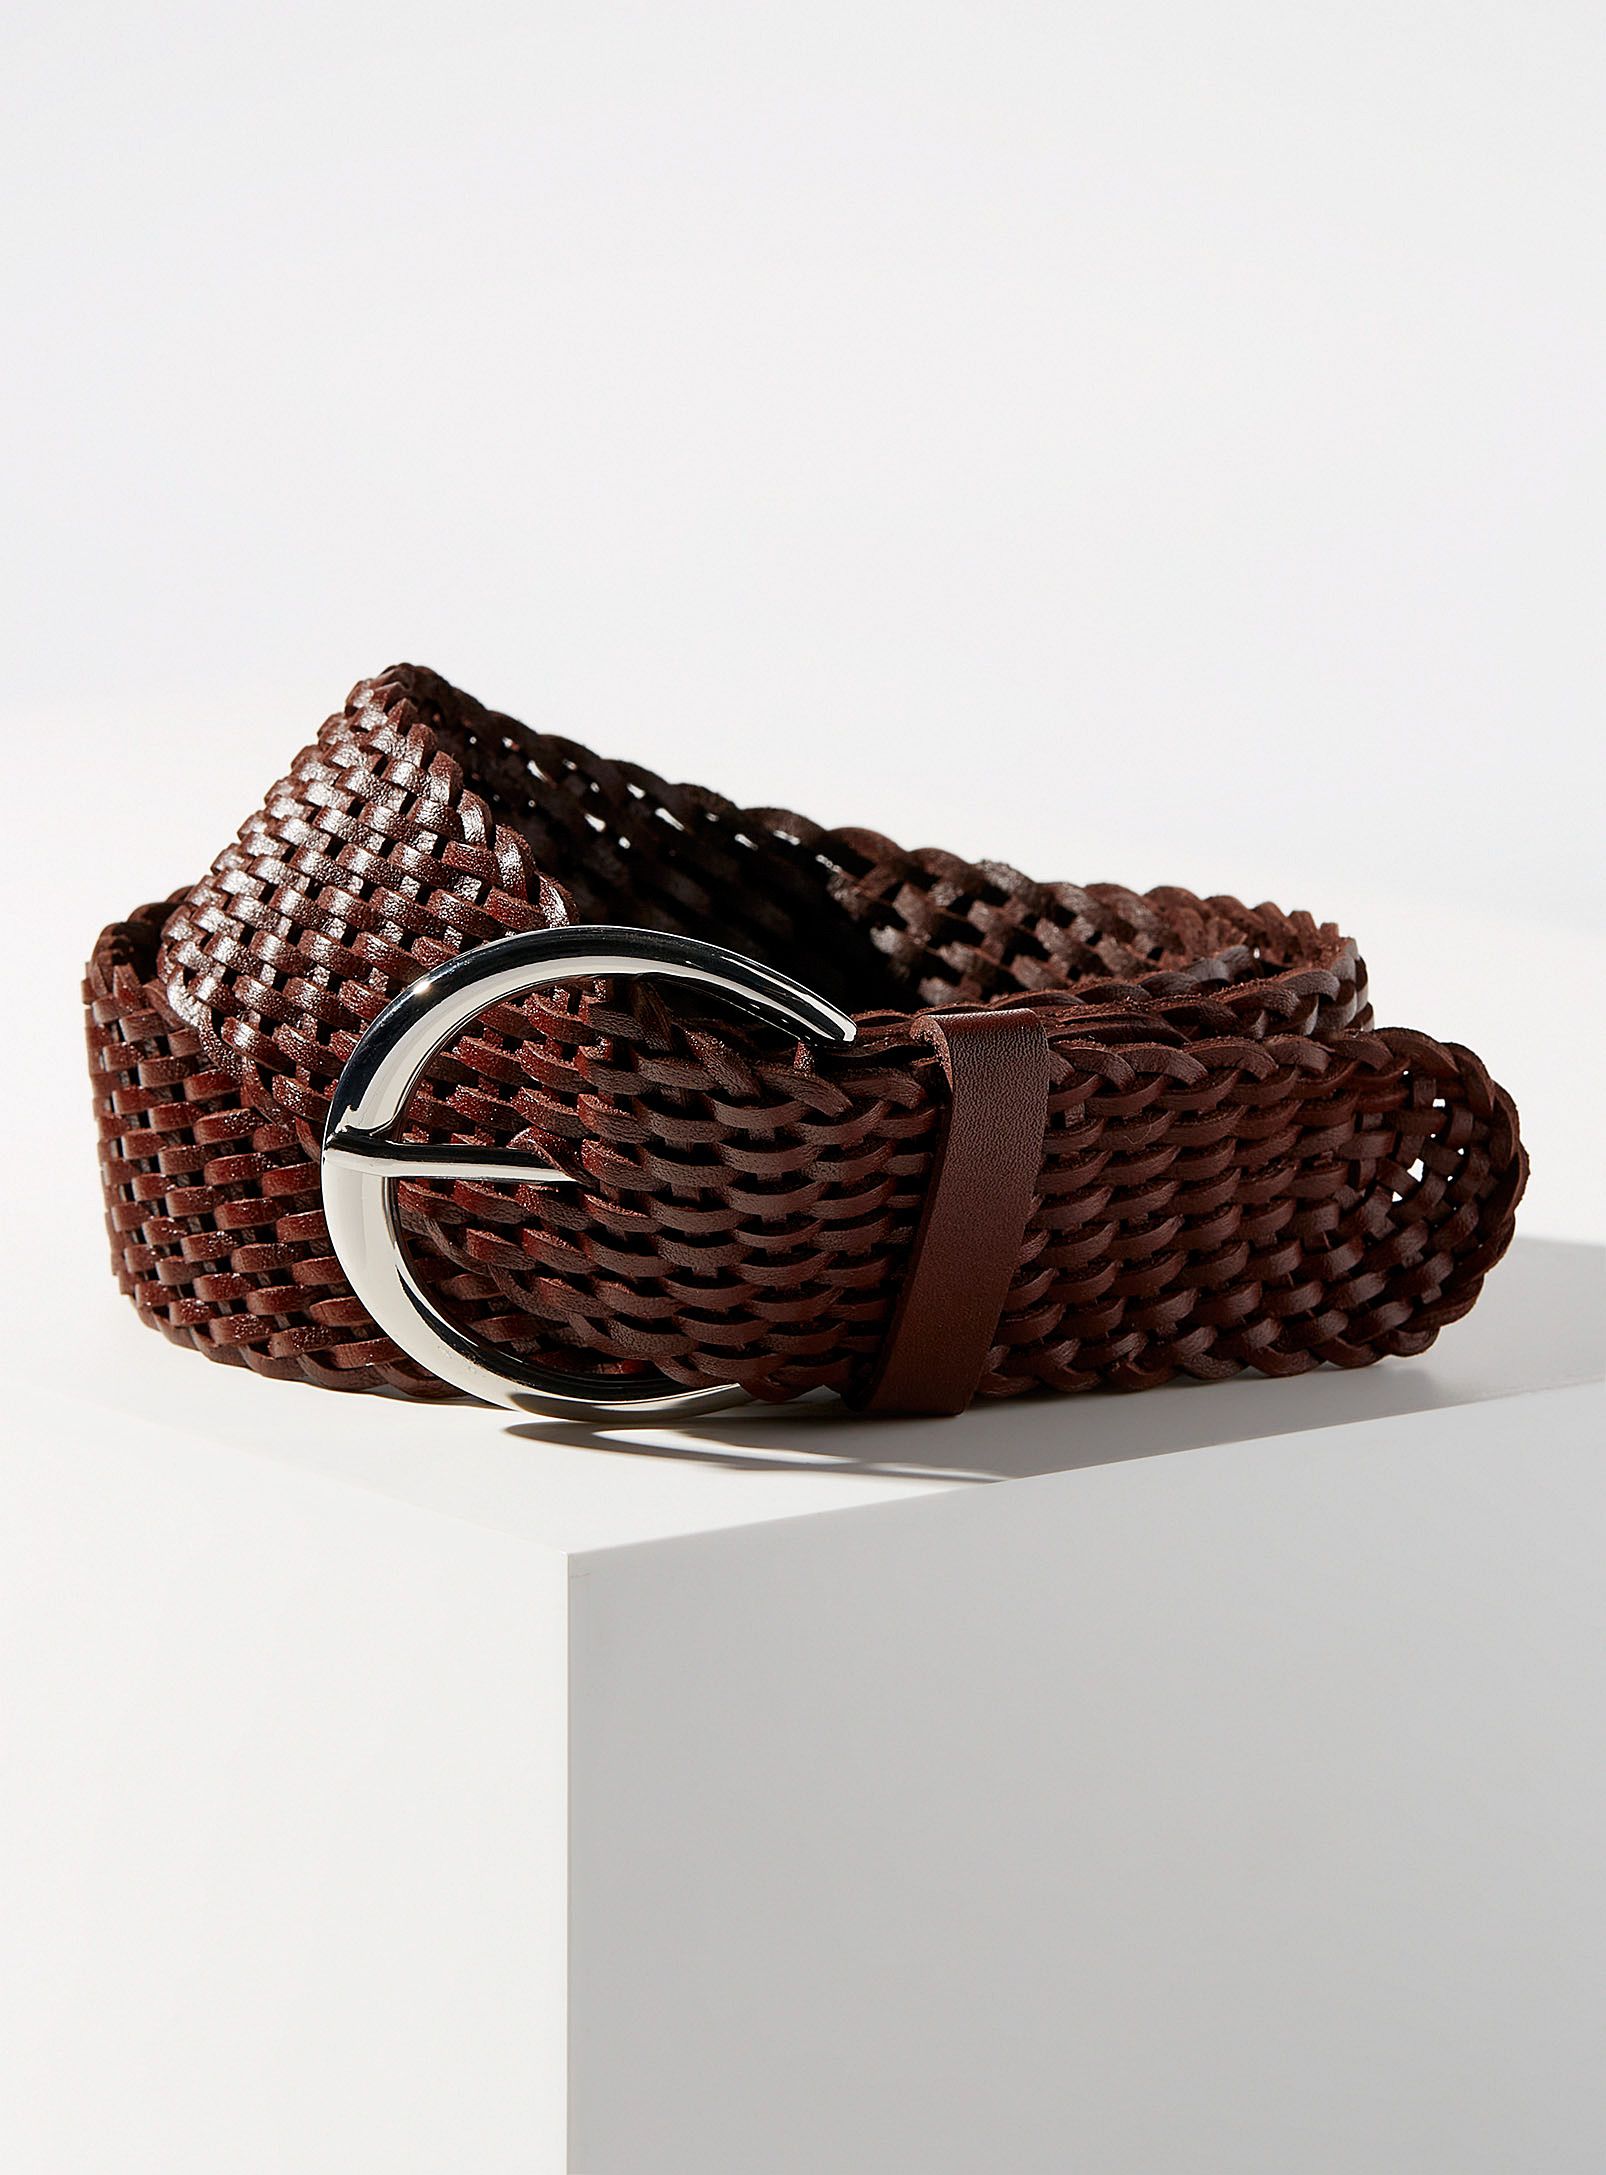 Braided Belts: Add Texture and Interest to Your Outfits